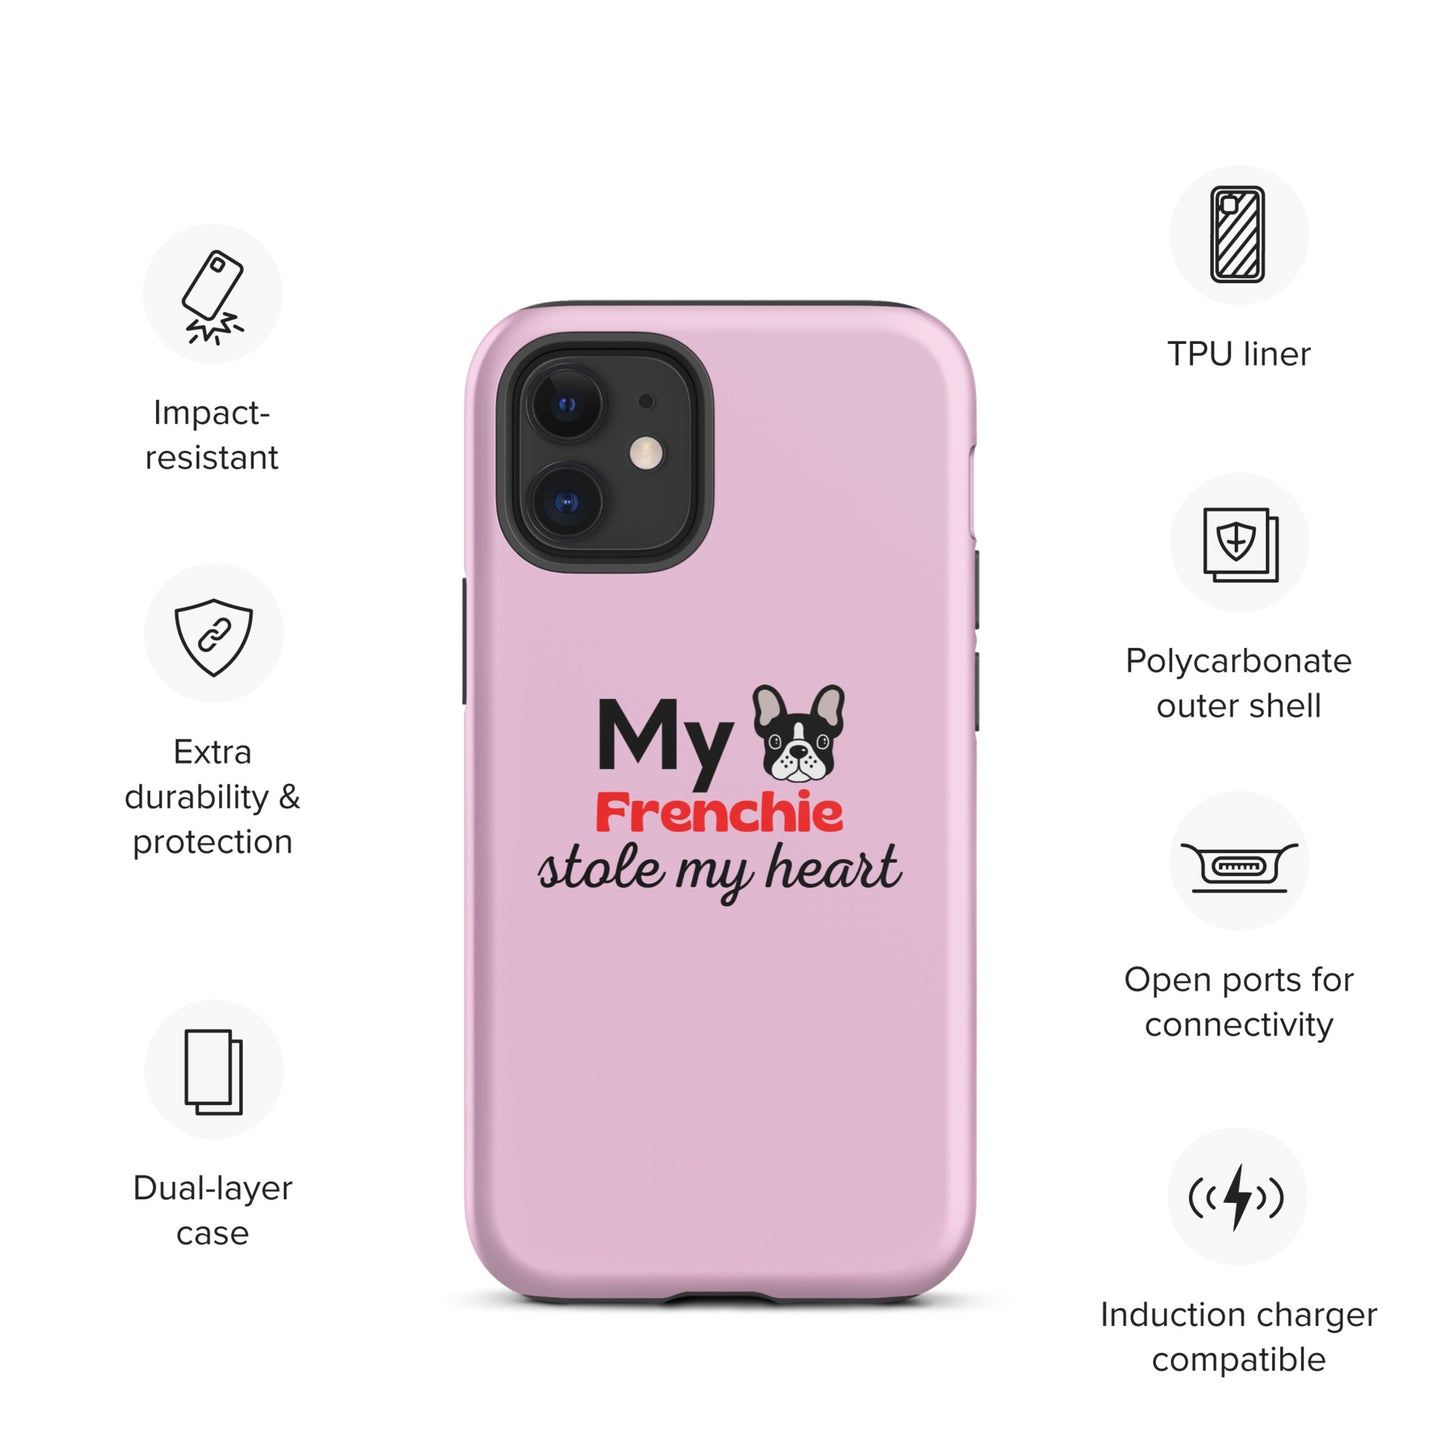 iPhone case 'My Frenchie stole my heart' Pink